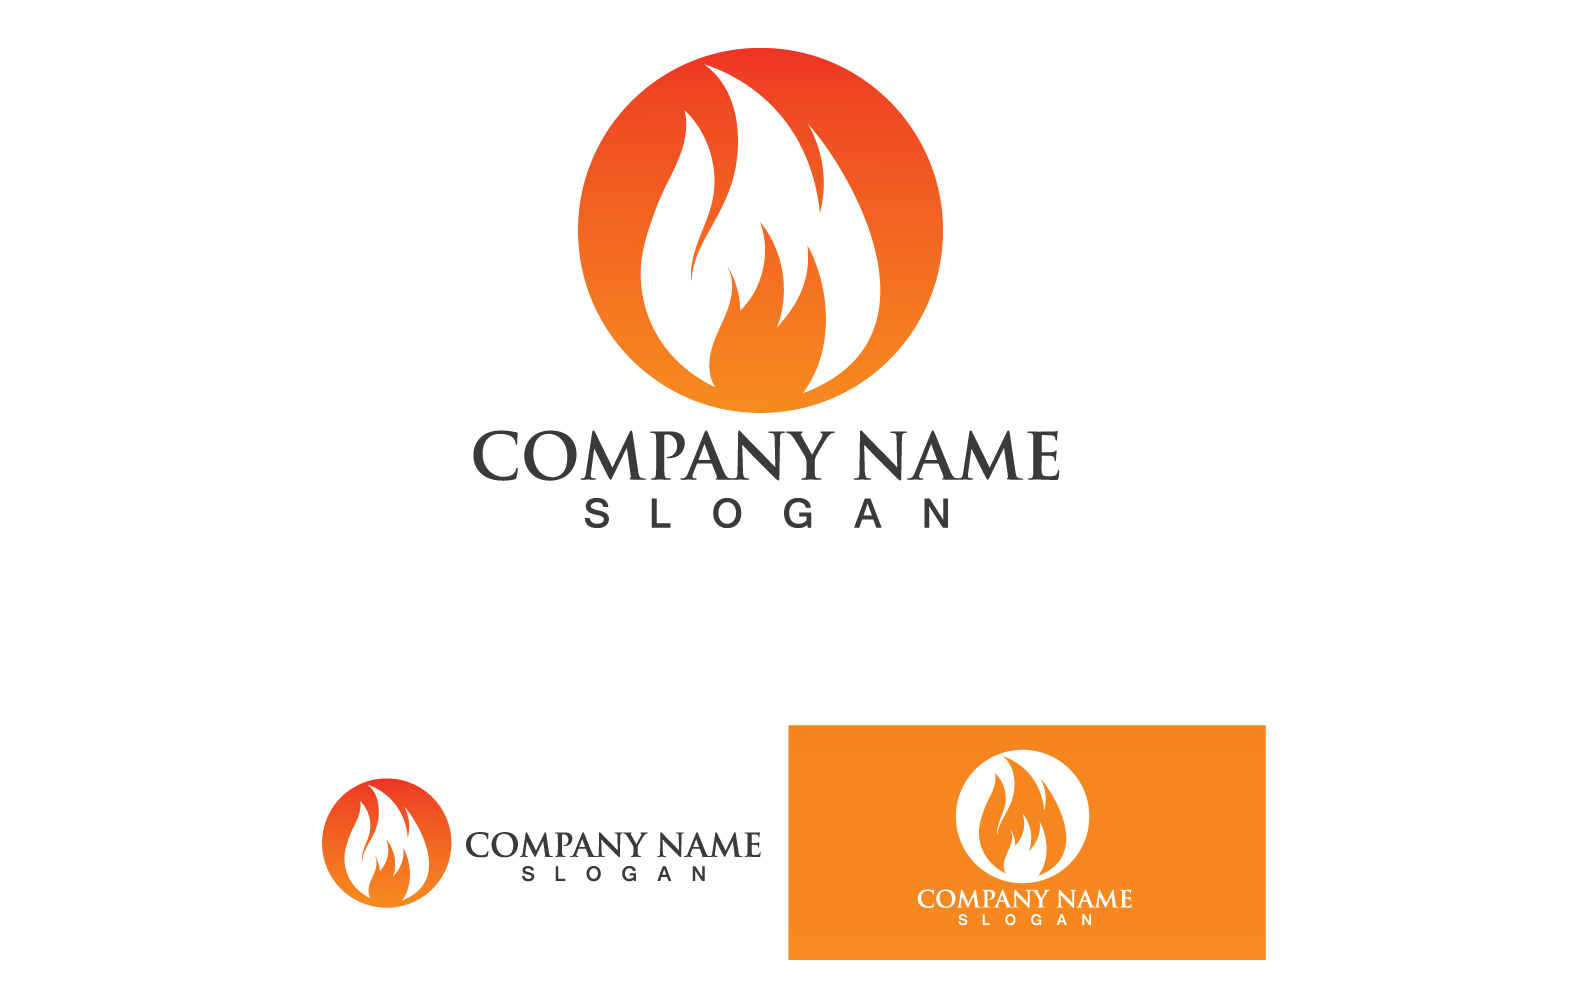 Wing Bird Business Logo Your Company Name V40